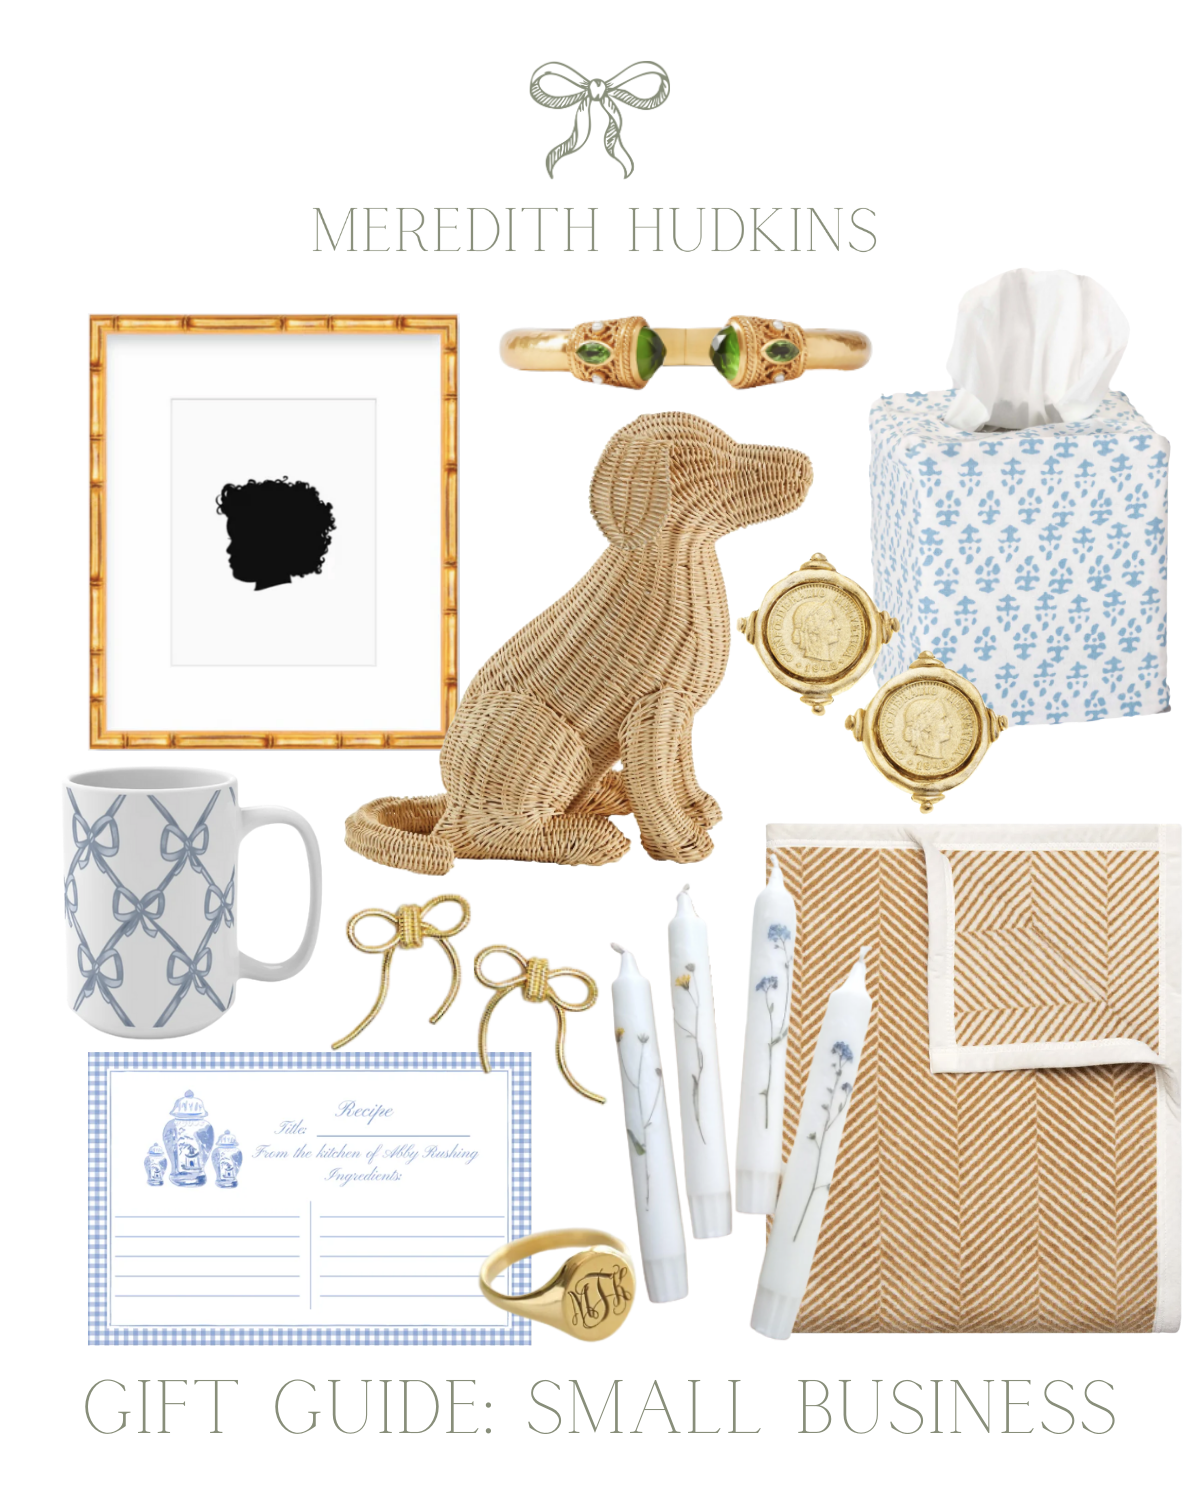 Mother's Day Gift Guide: Over 100 Gift Ideas — Meredith Hudkins